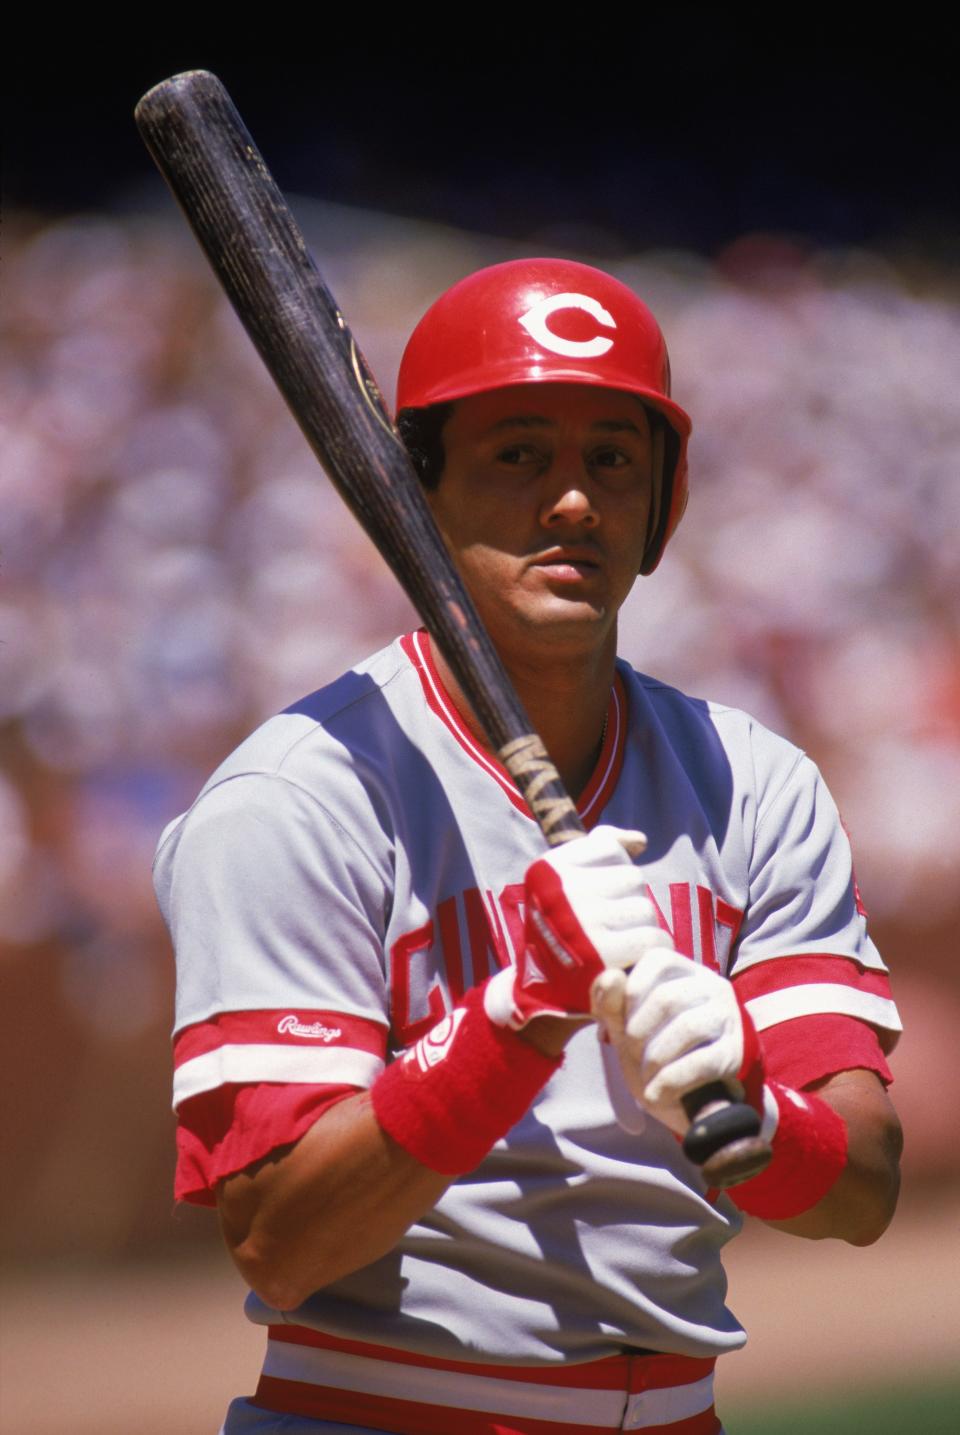 1987:  Dave Concepcion of the Cincinnati Reds grips his  bat during a MLB game in the 1987 season. ( Photo by: Otto Greule Jr/Getty Images)